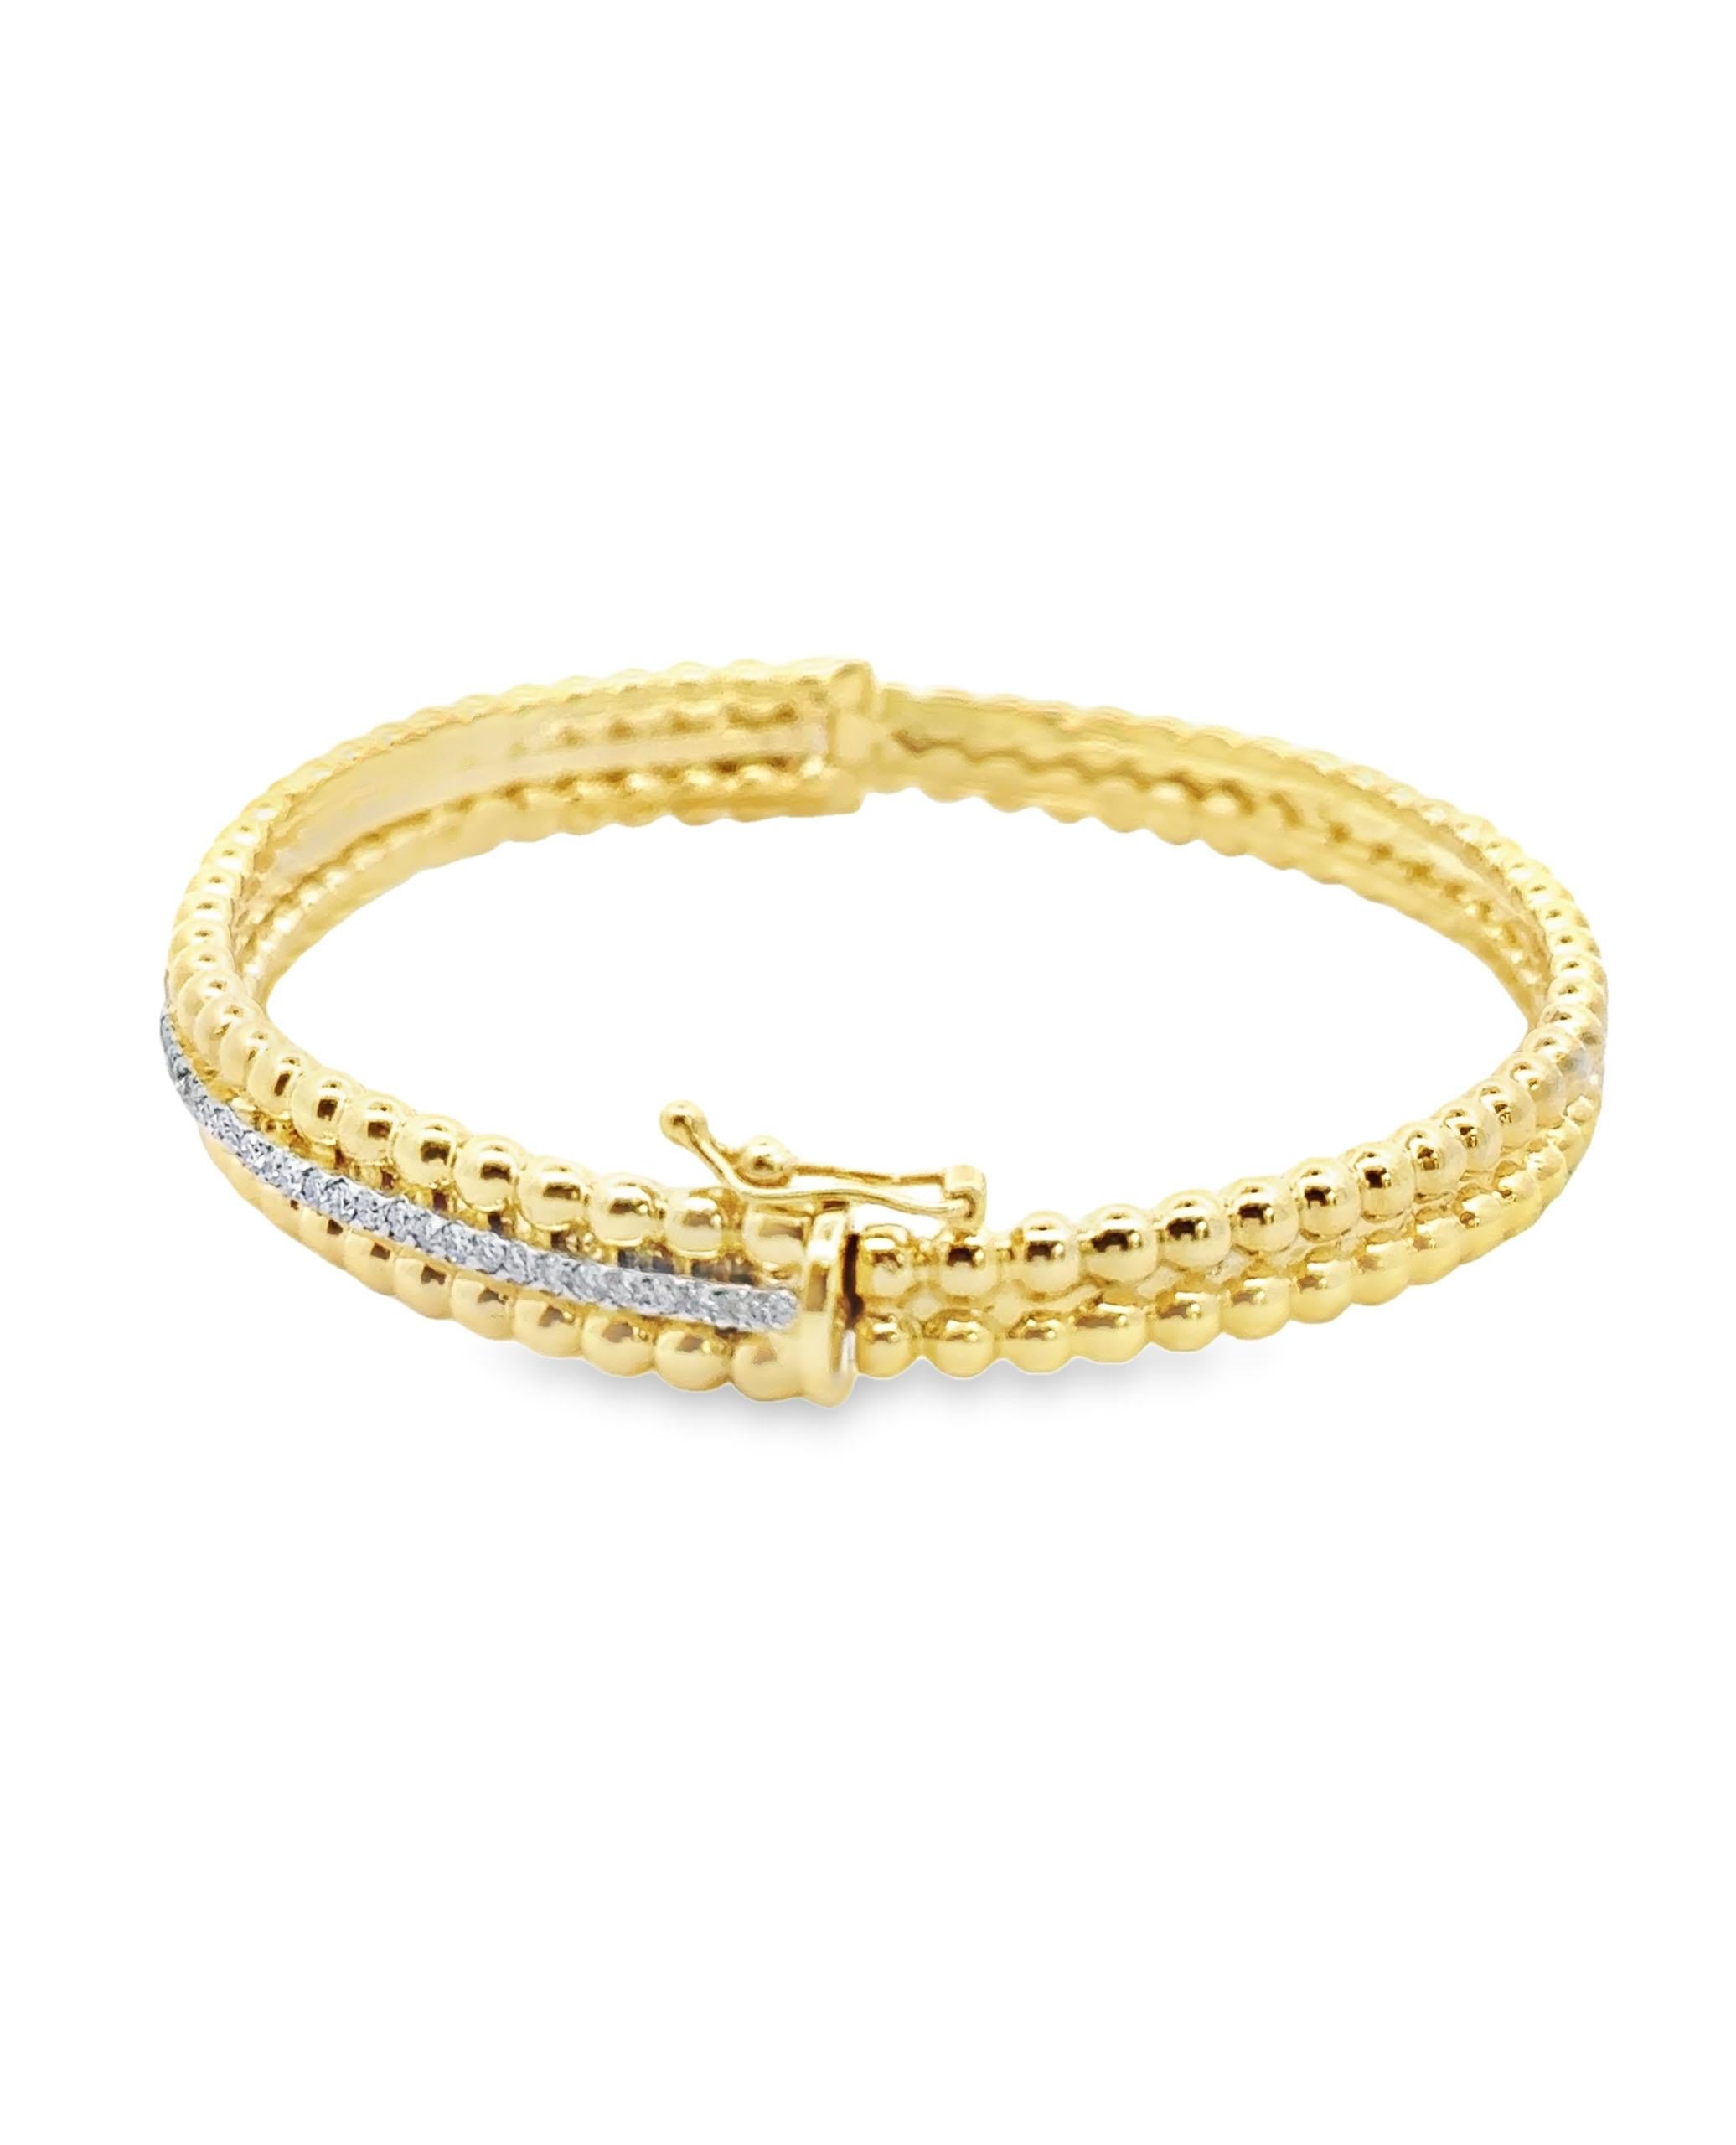 Contemporary 14K Yellow Gold Bangle Bracelet with Diamonds For Sale